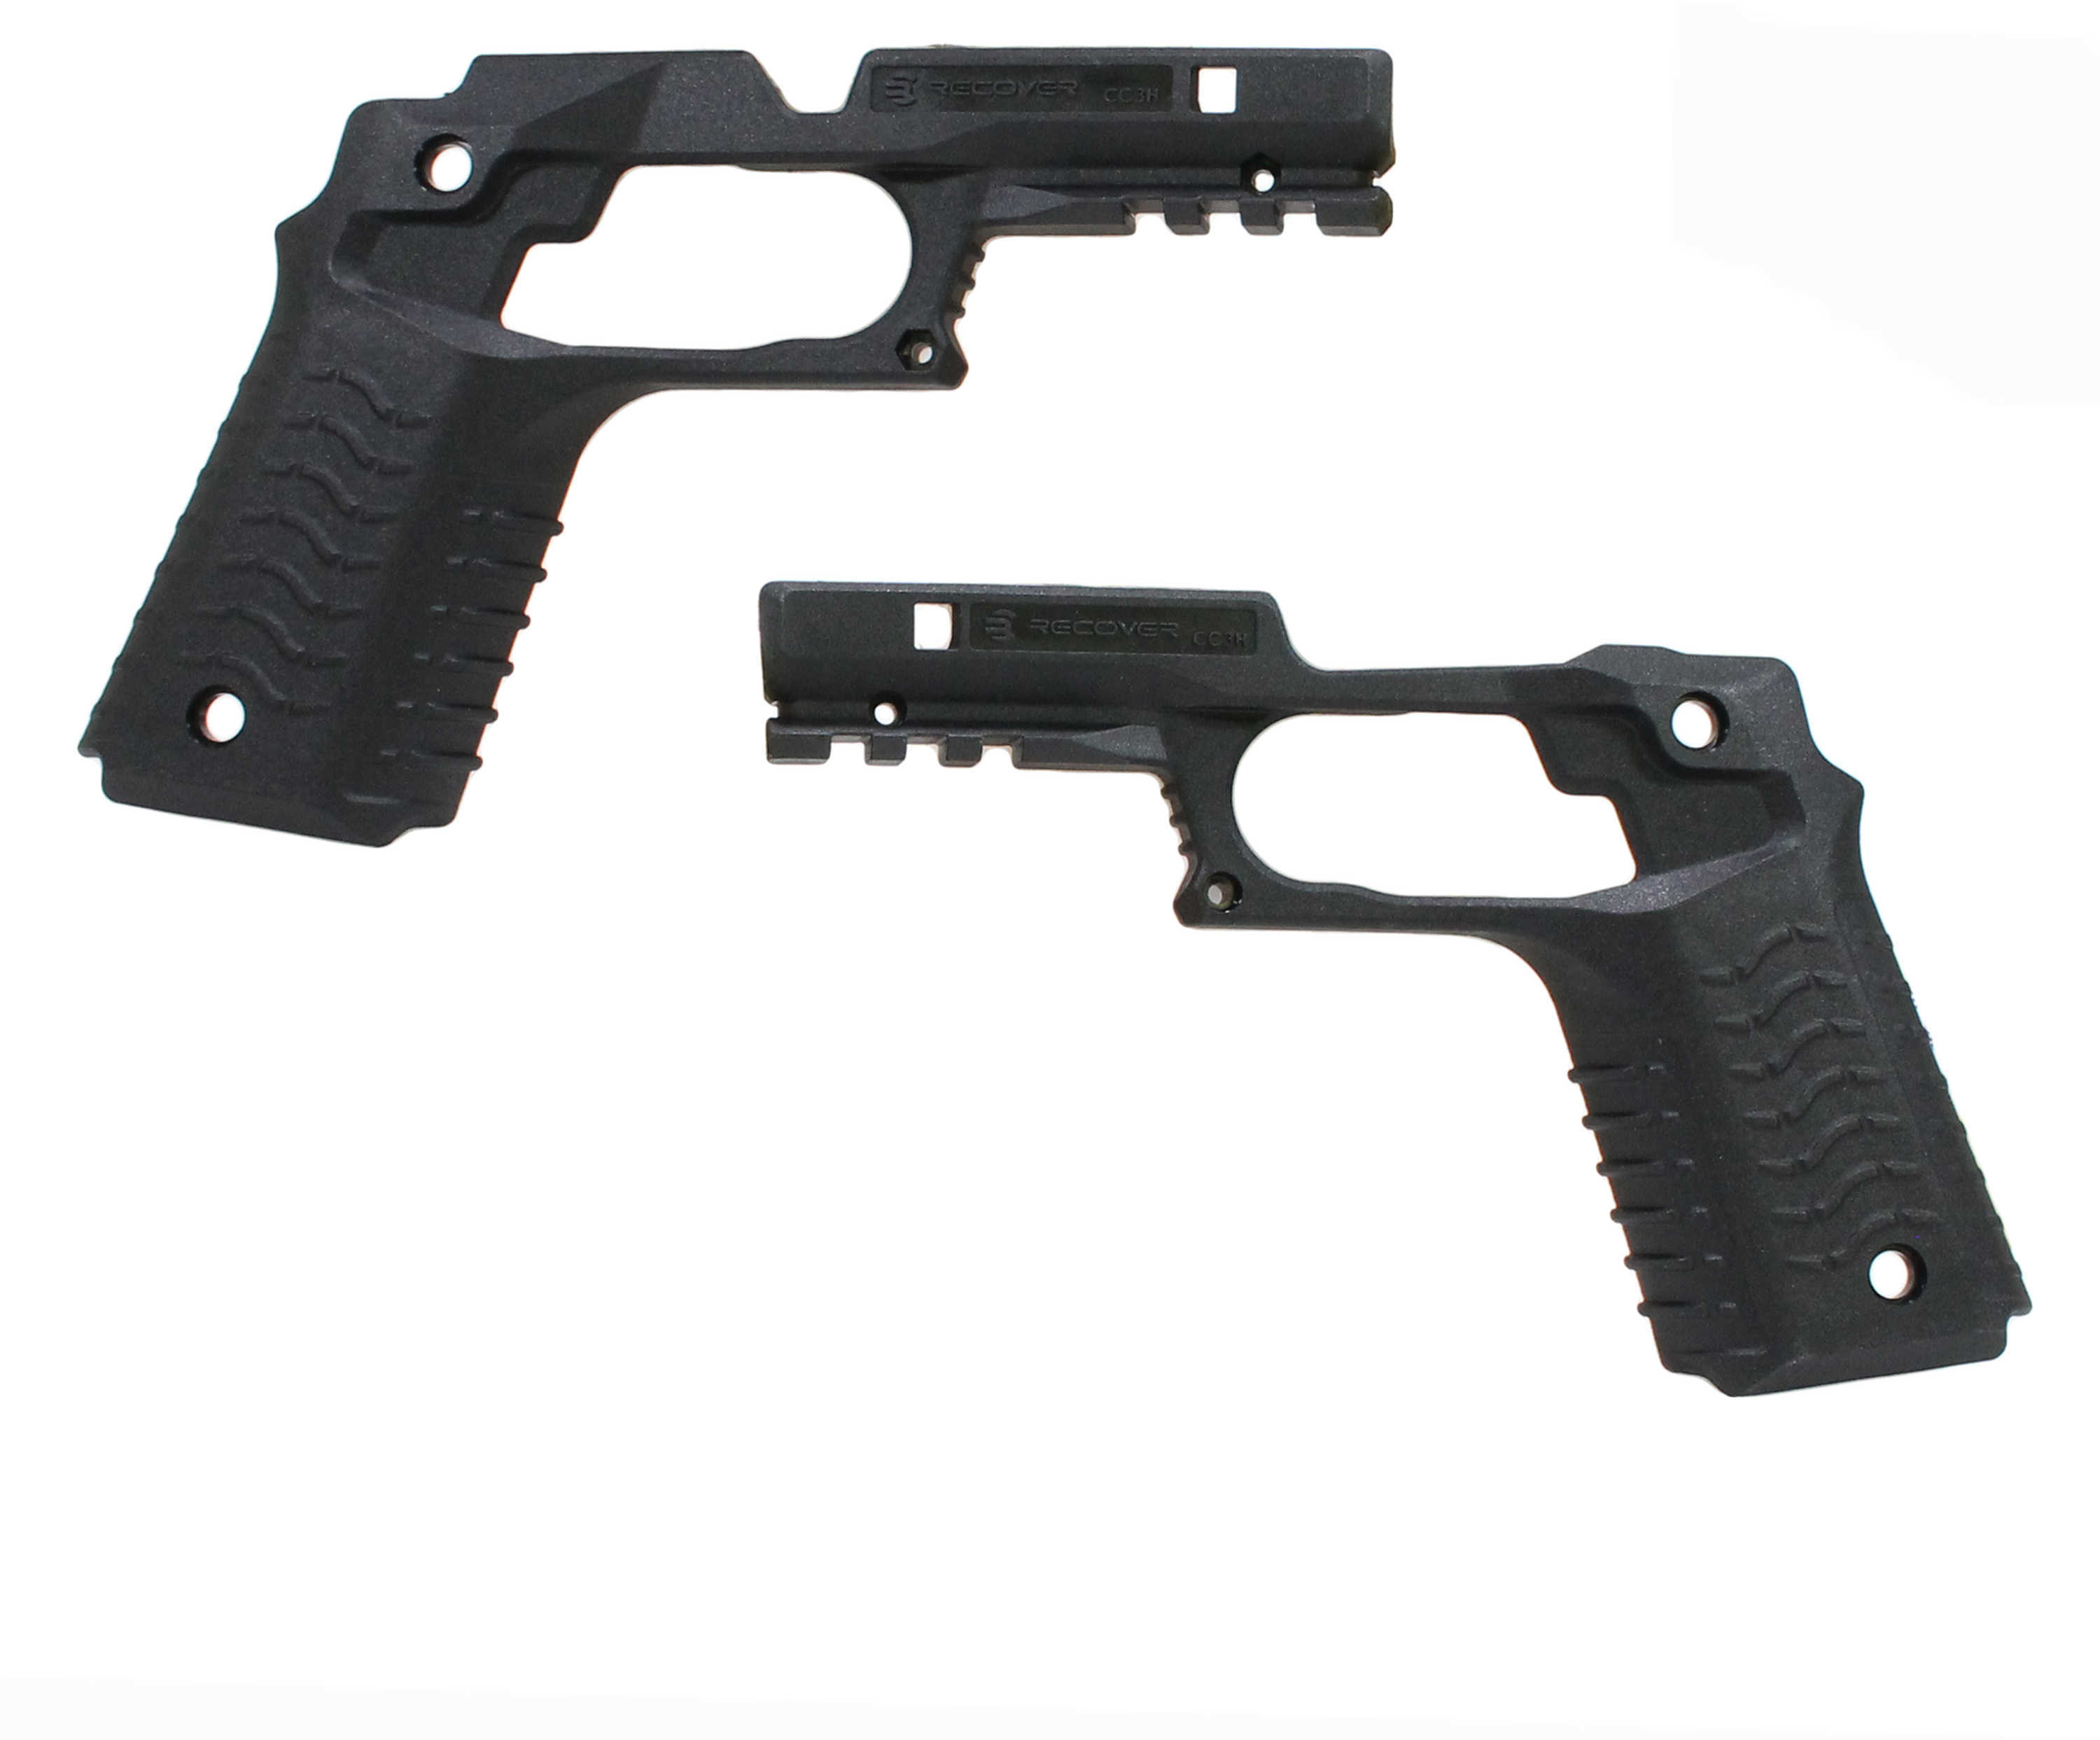 ReCover Tactical 1911 Grips with Intergrated Rail Adapter (Black)